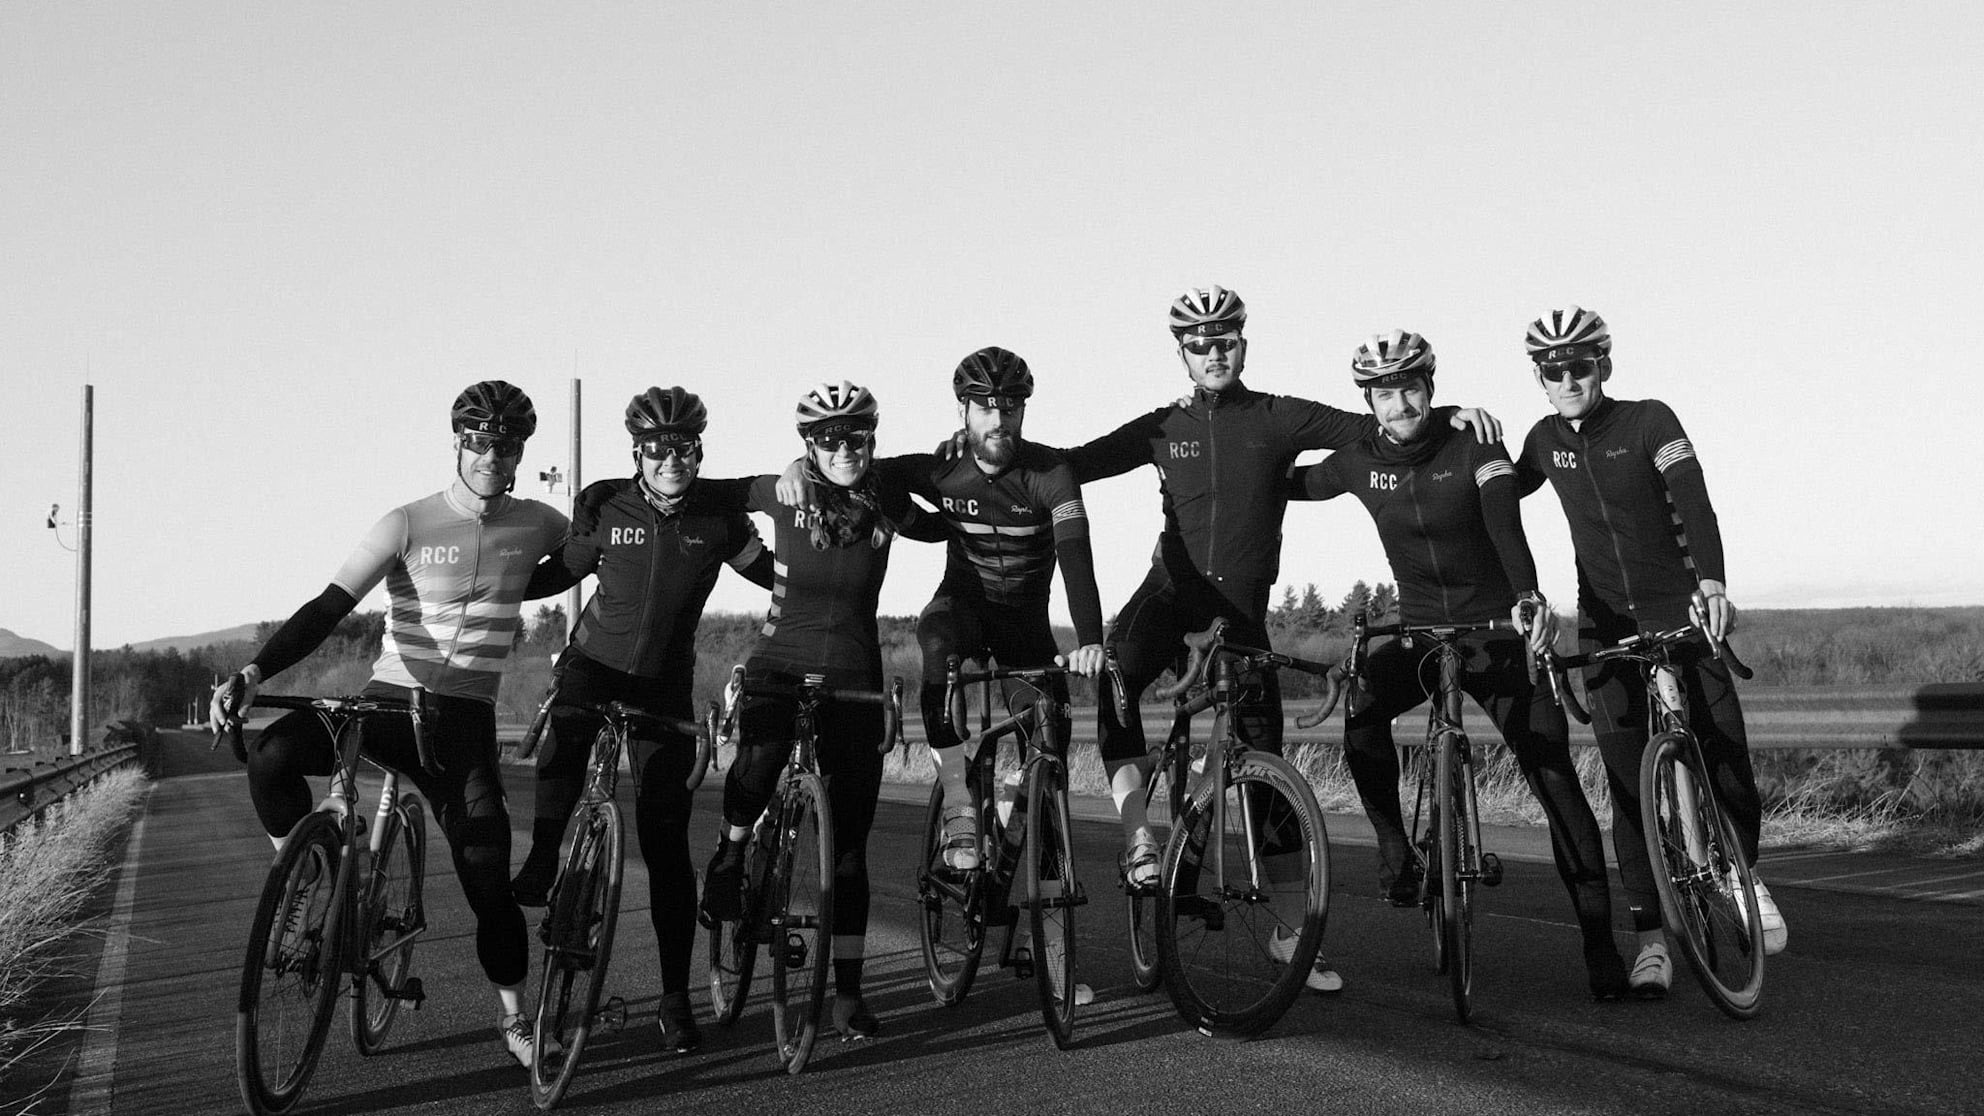 Meet the seven riders who came together for the Rapha Cycling Club’s trip to New York State.